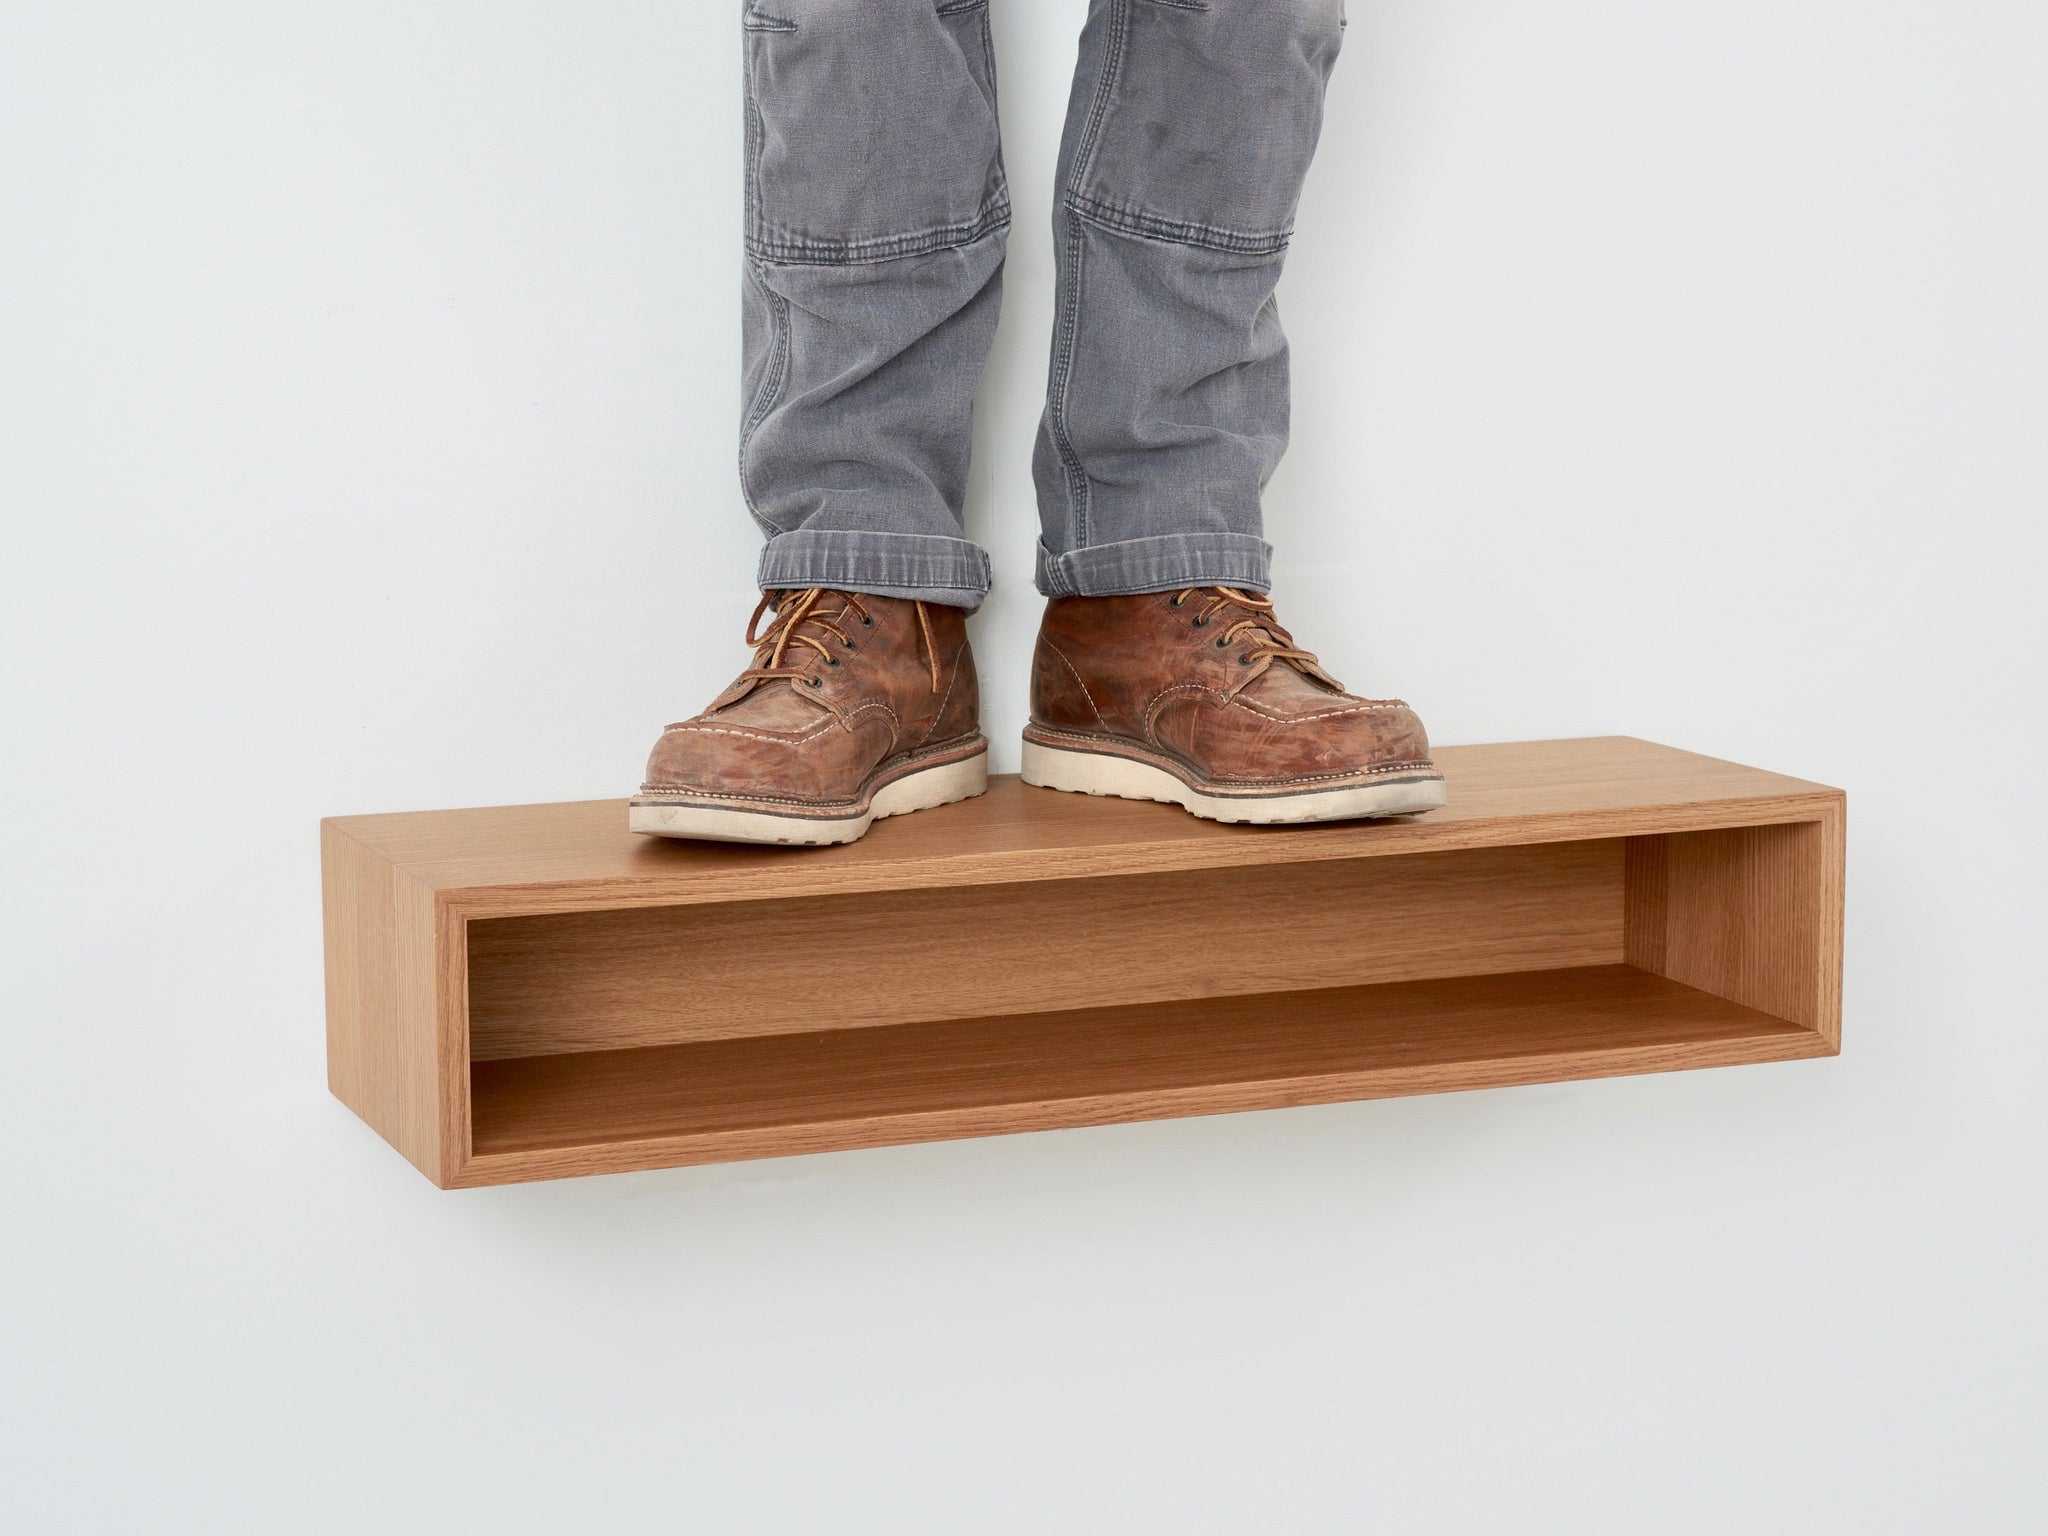 A person's legs on a shelf.